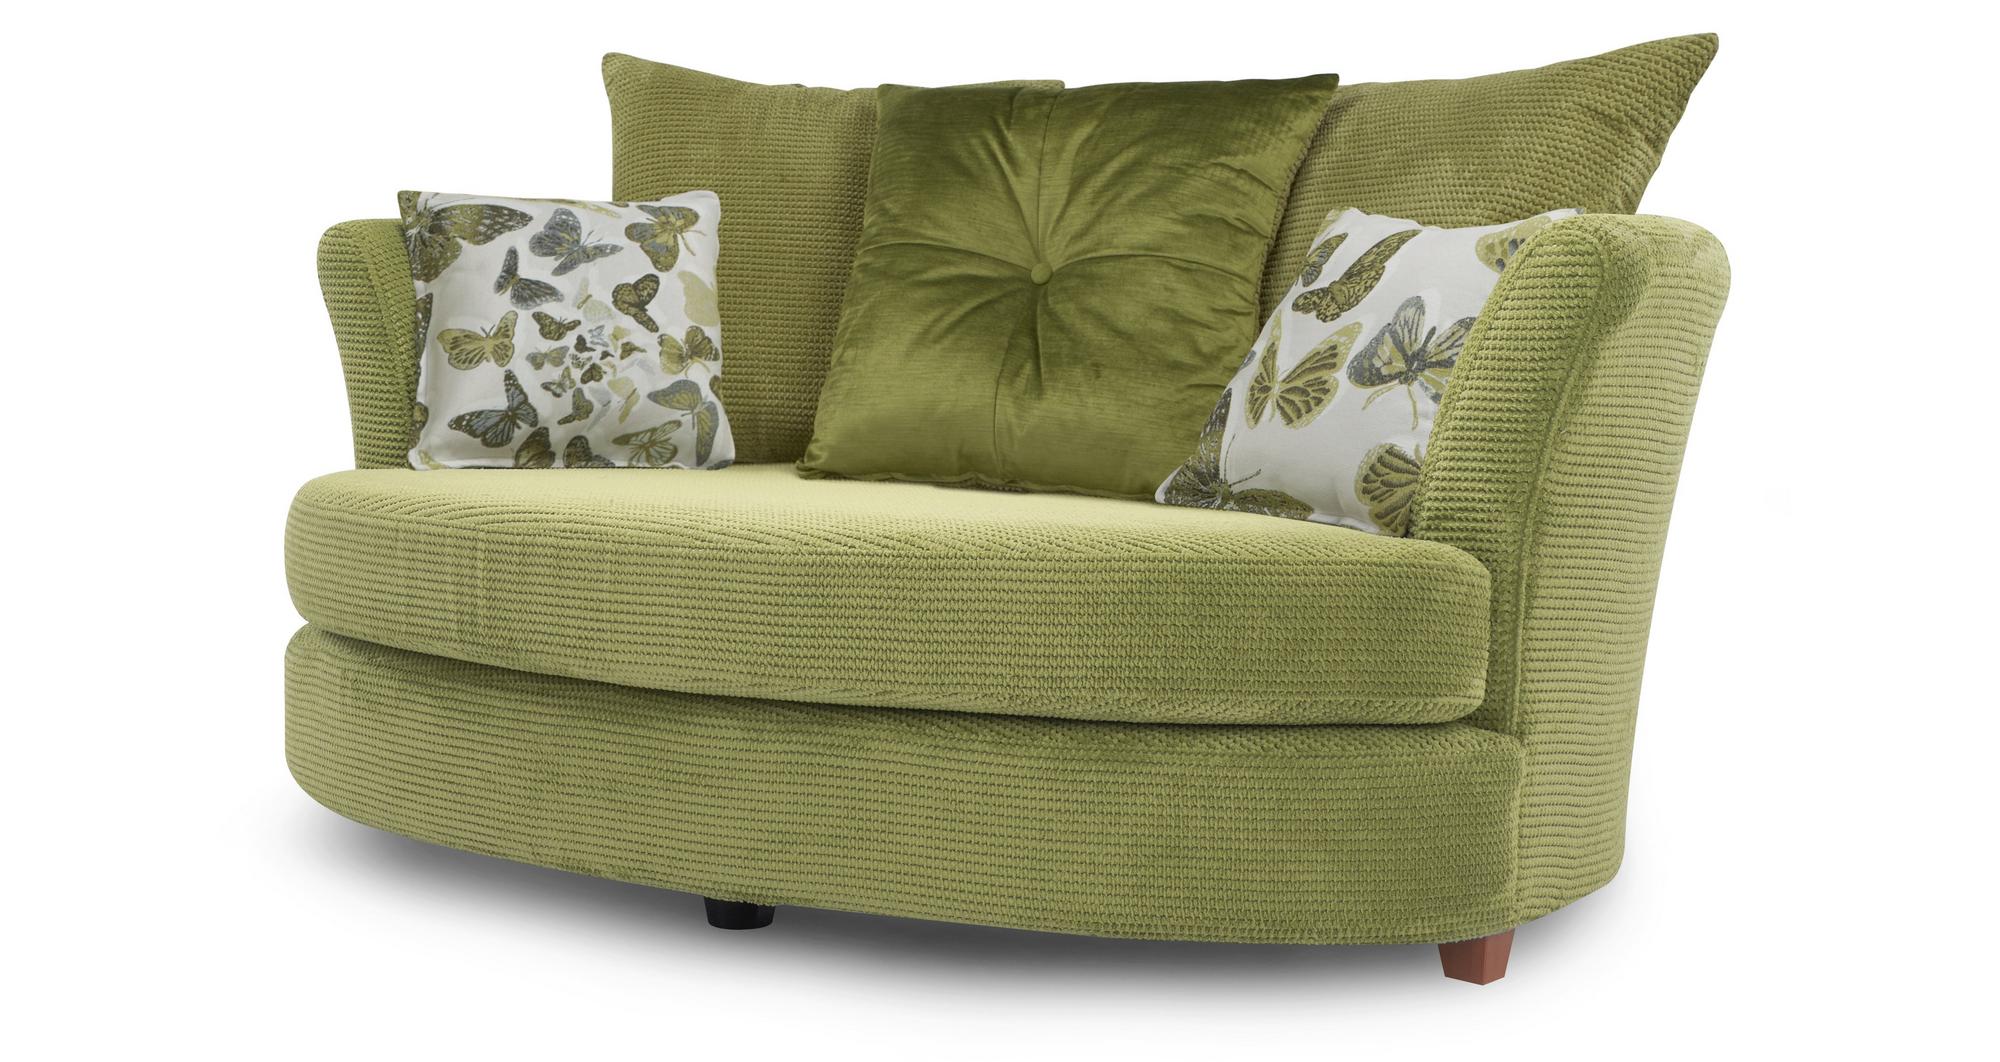 DFS Escape Lime Green Fabric 4 Seater, Cuddler Chair & Footstool | eBay